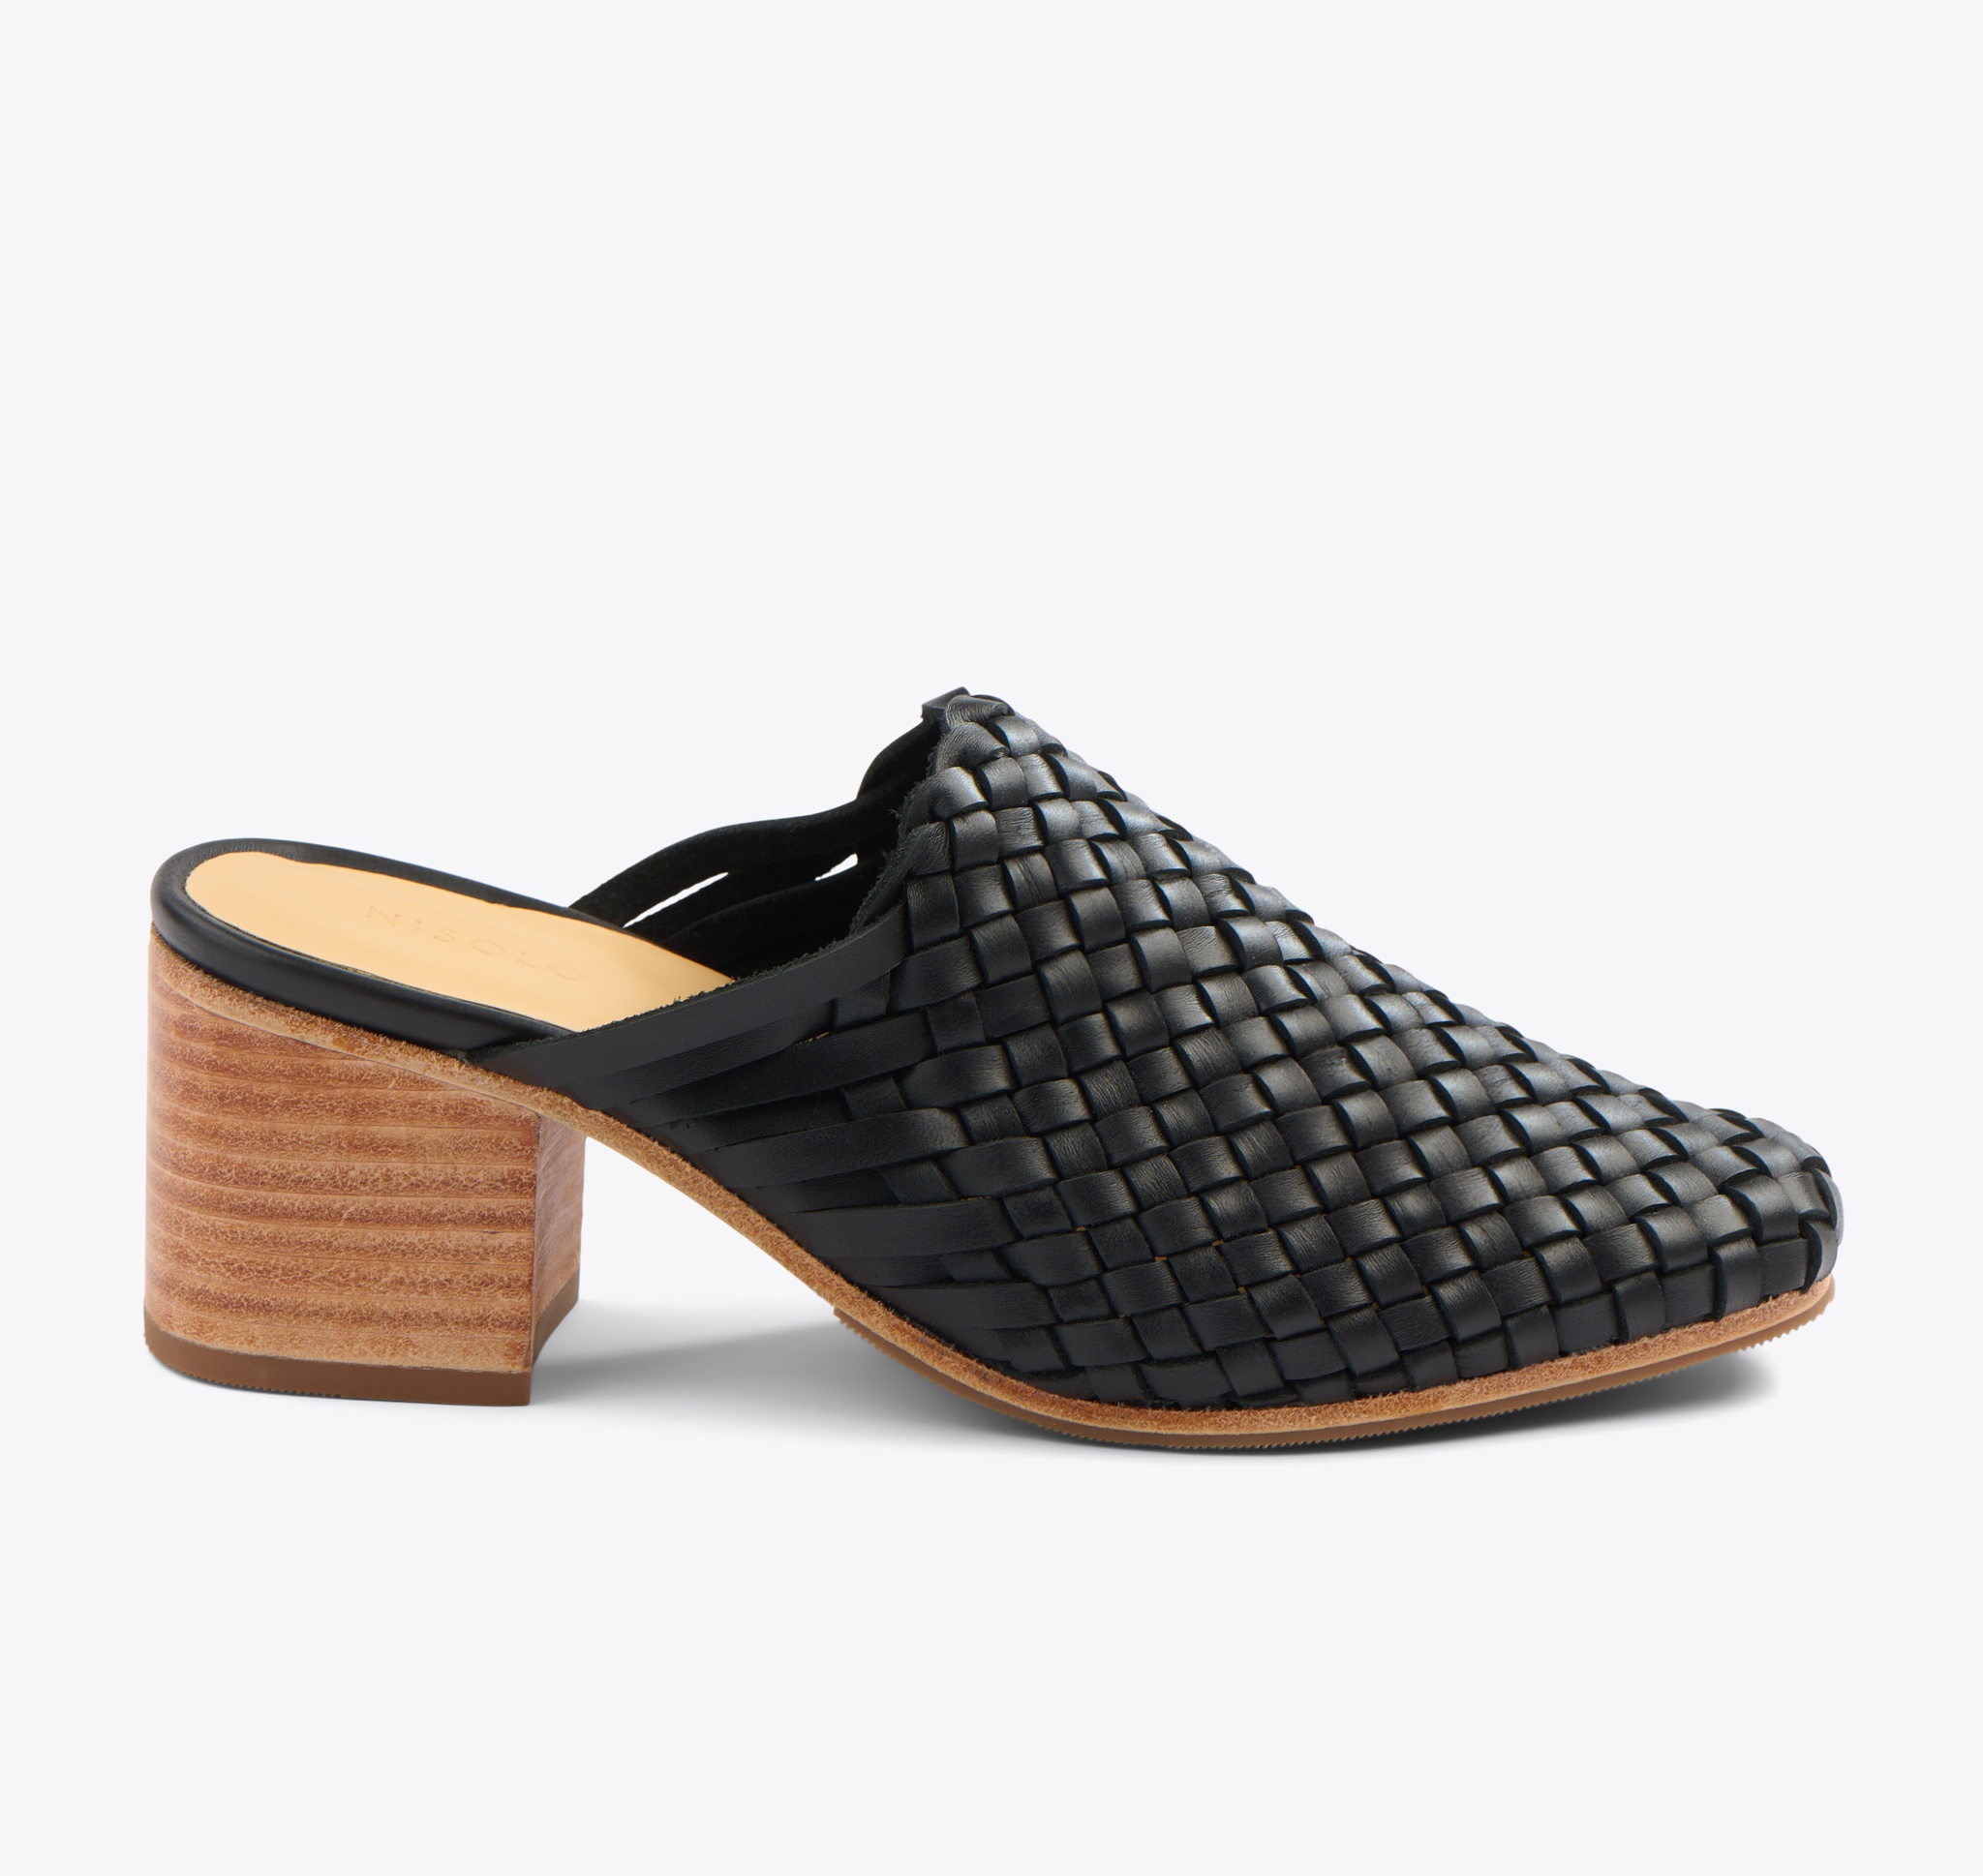 Nisolo All-Day Woven Heeled Mule Black - Every Nisolo product is built on the foundation of comfort, function, and design. 